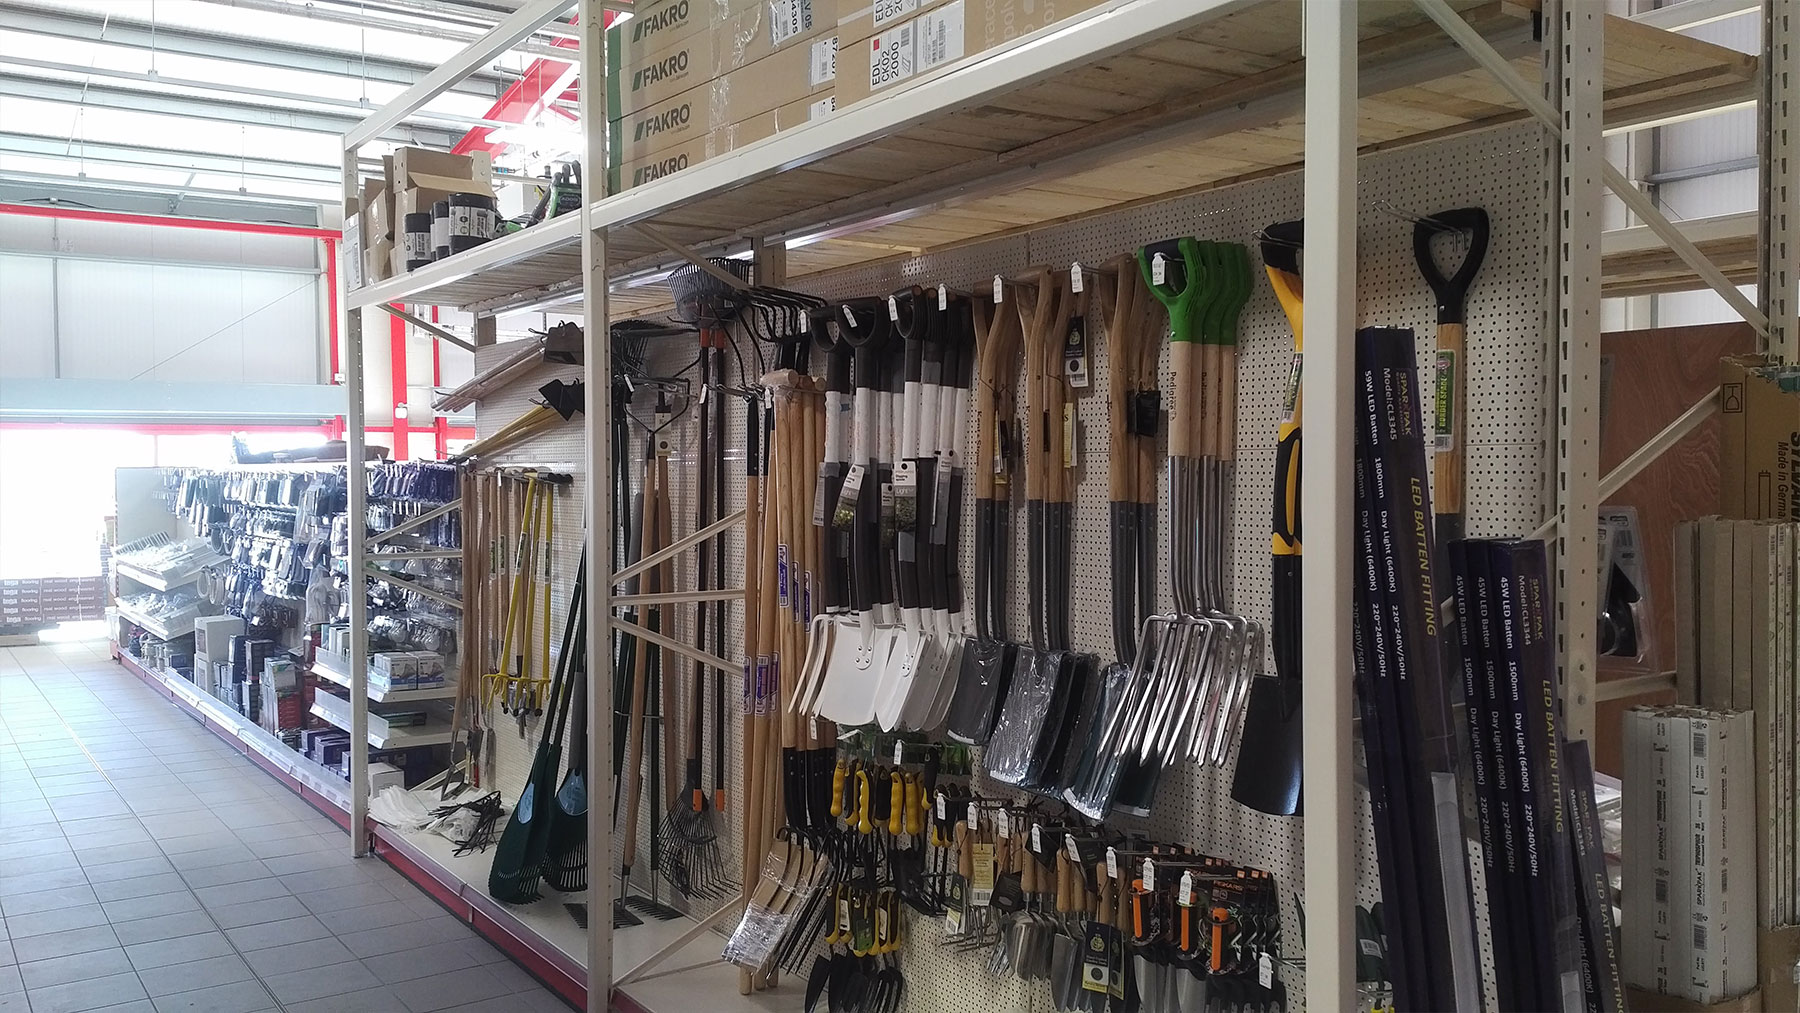 Shelving for tools